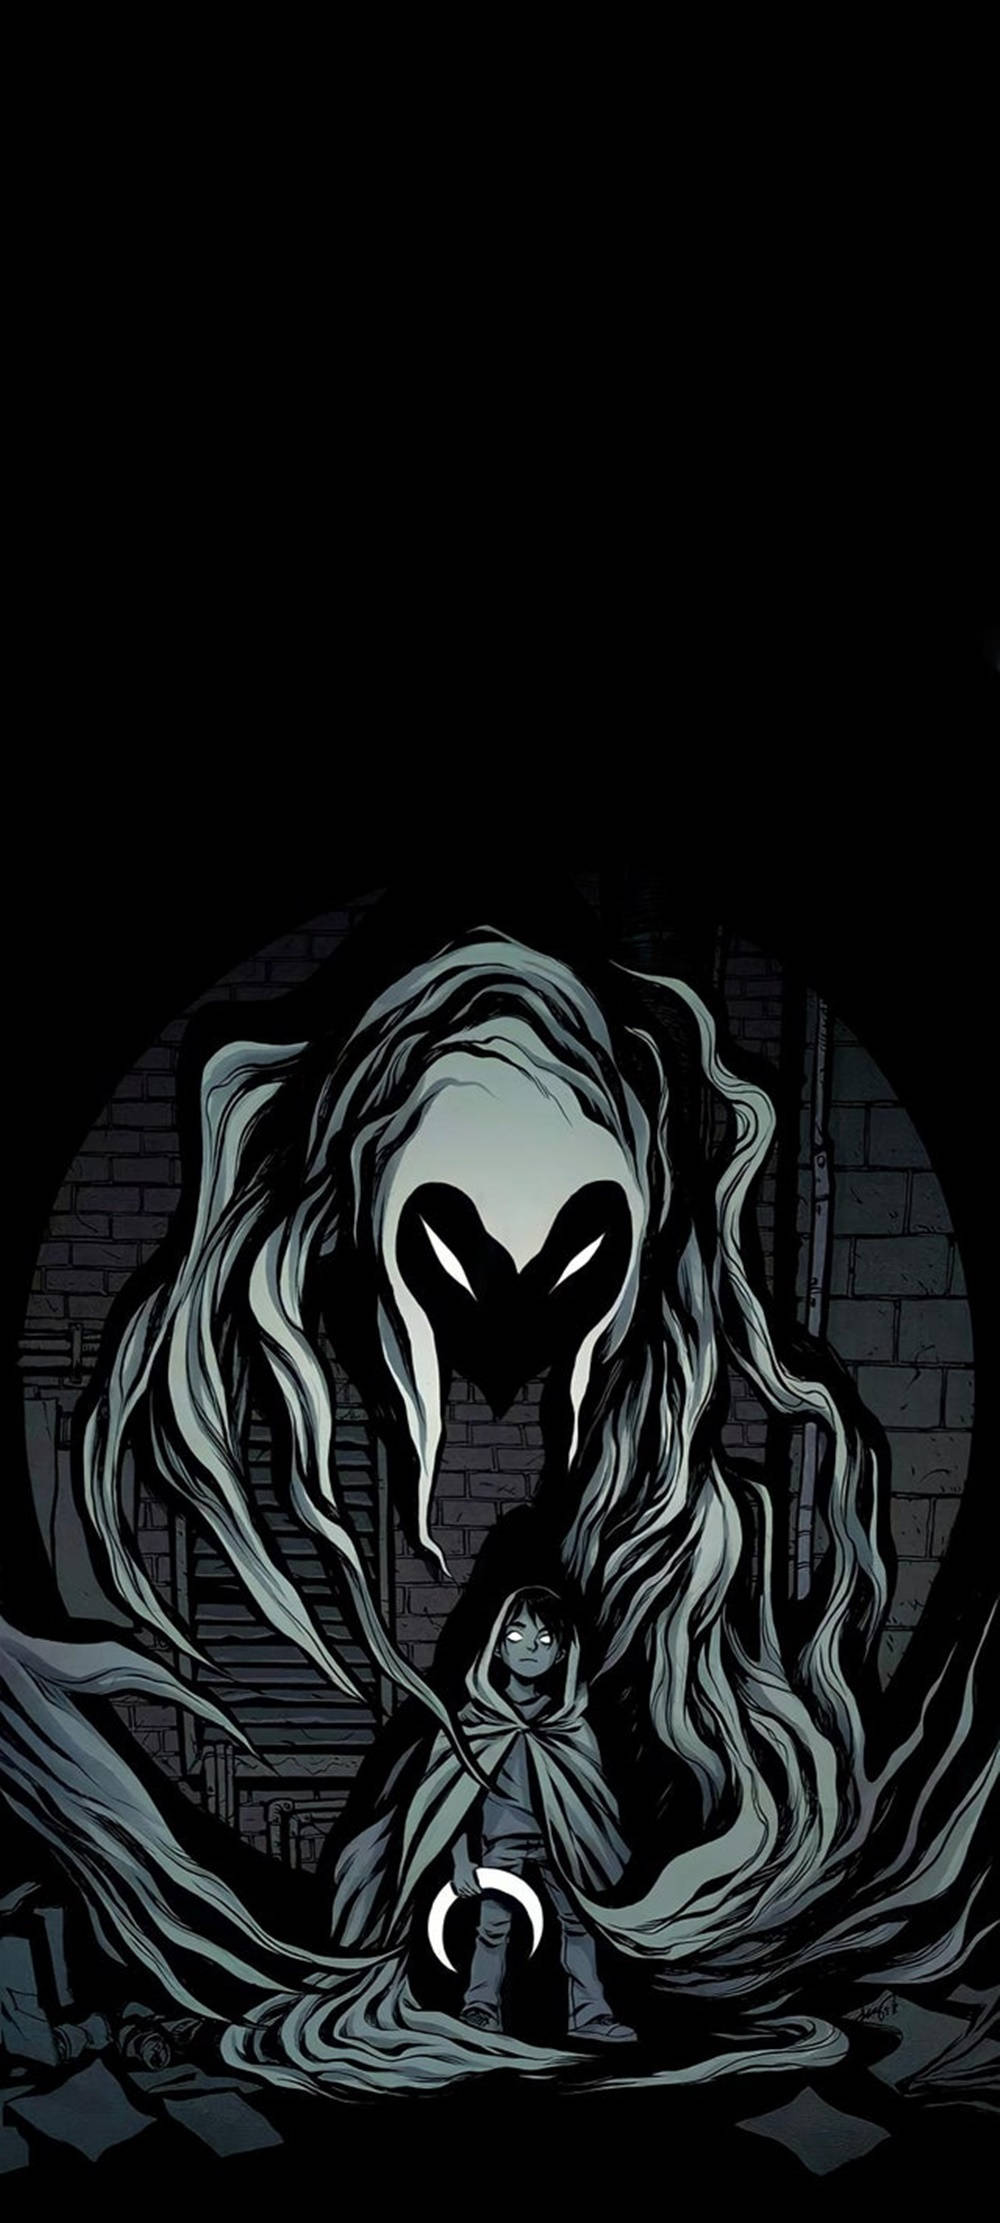 Marvel's Moon Knight On Phone- High Quality 4k Kid Concept Art Background